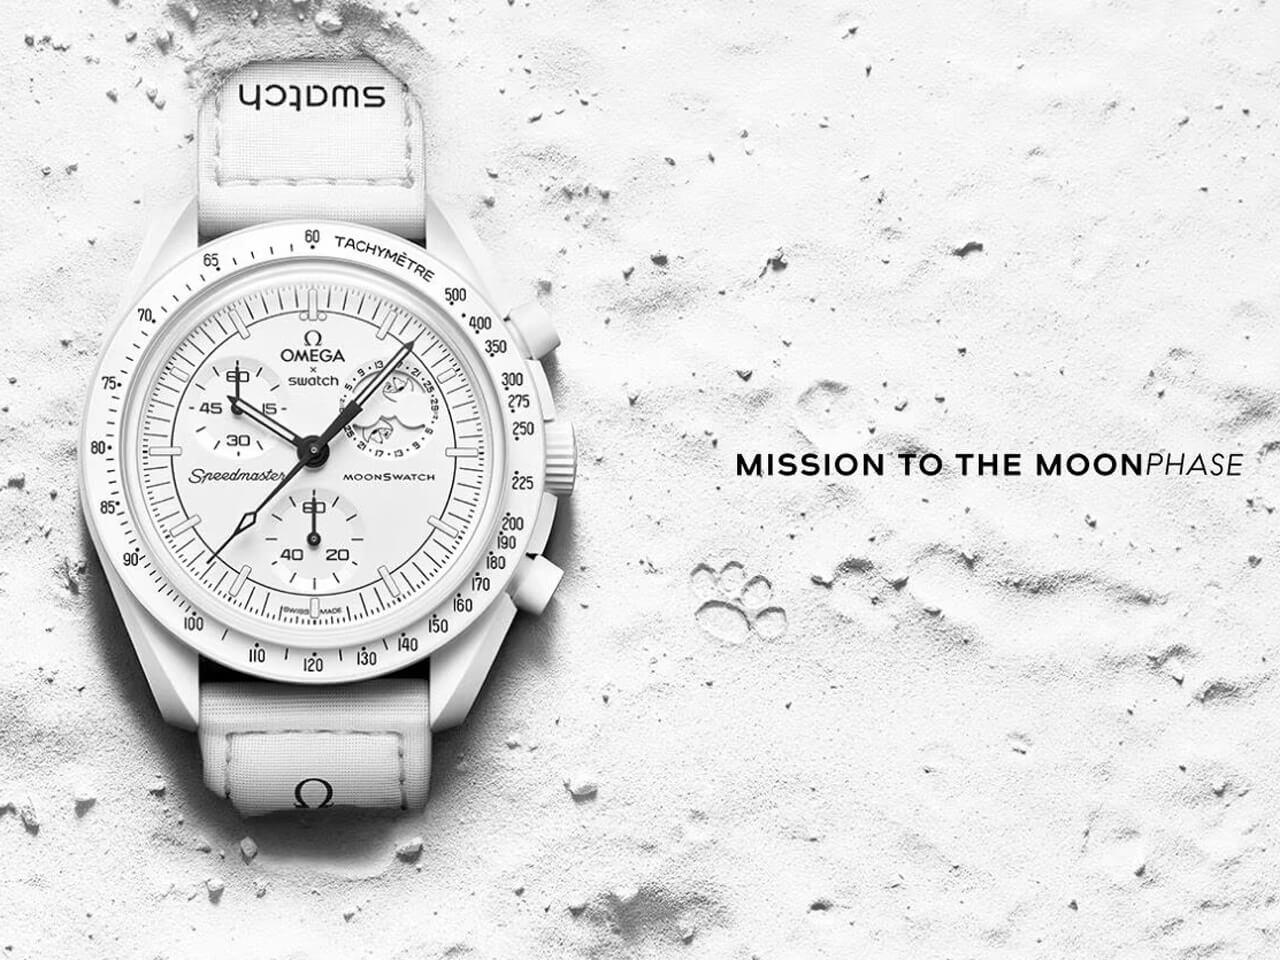 bioceramic-moonswatch-mission-to-the-moonphase-snoopy-01